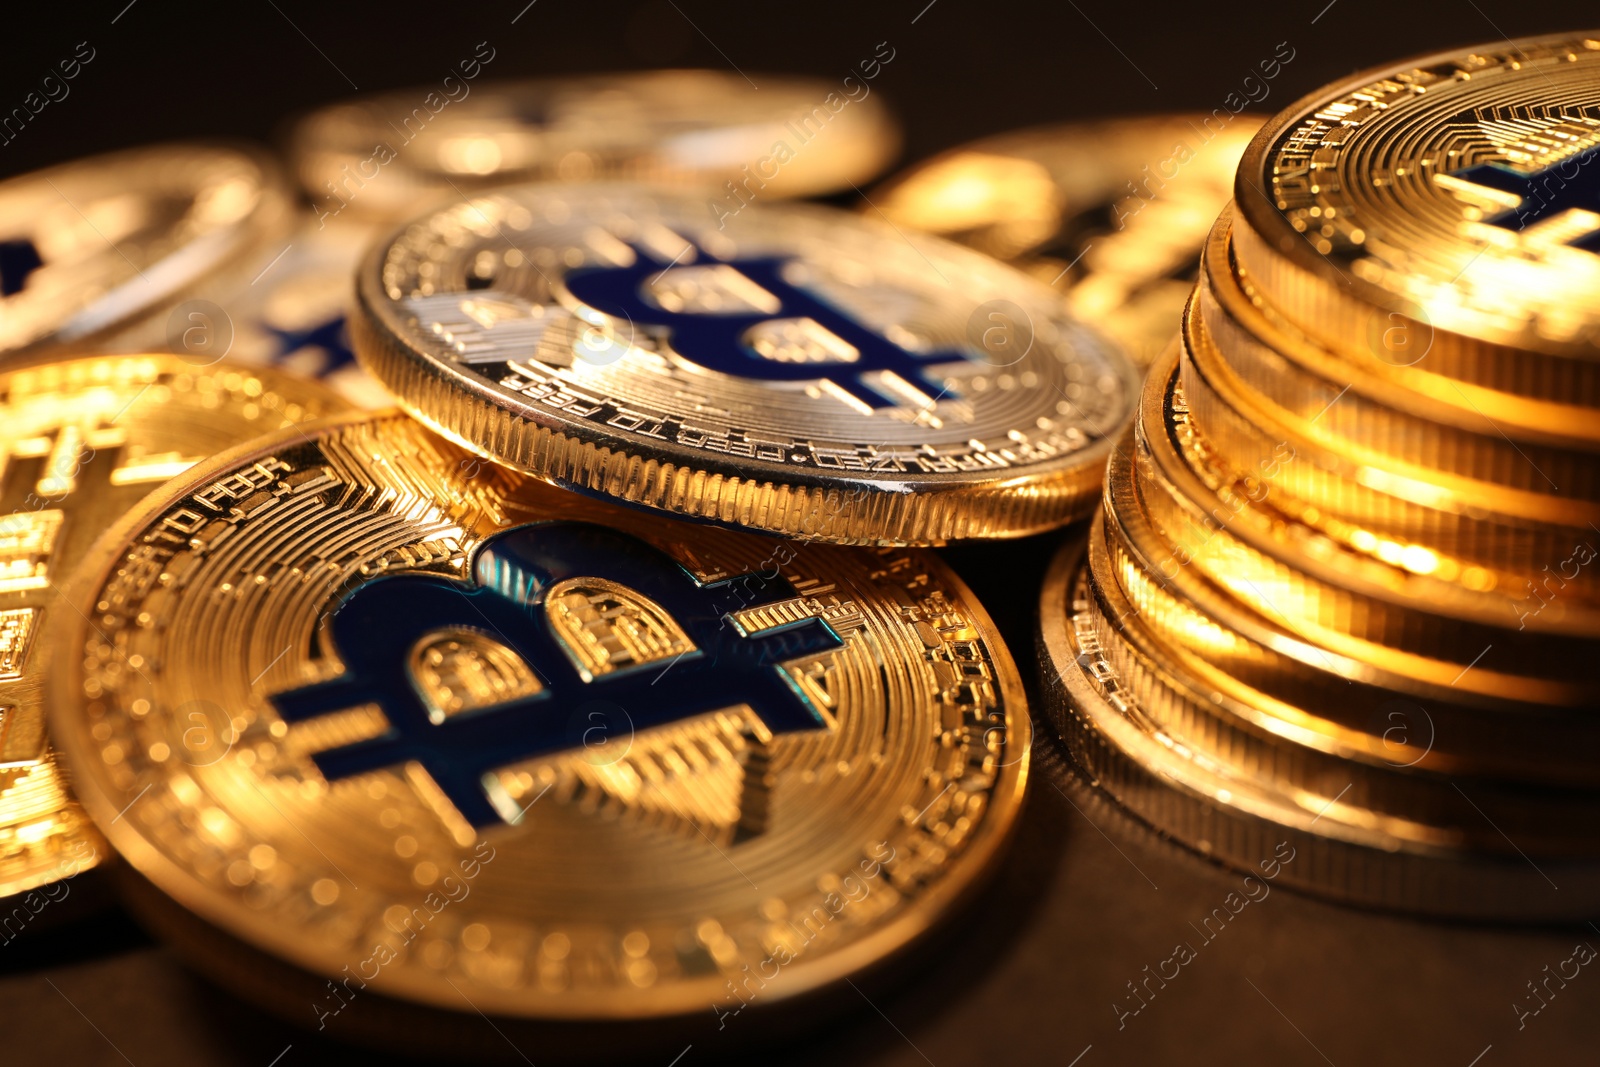 Photo of Shiny gold bitcoins on dark background, closeup view. Digital currency